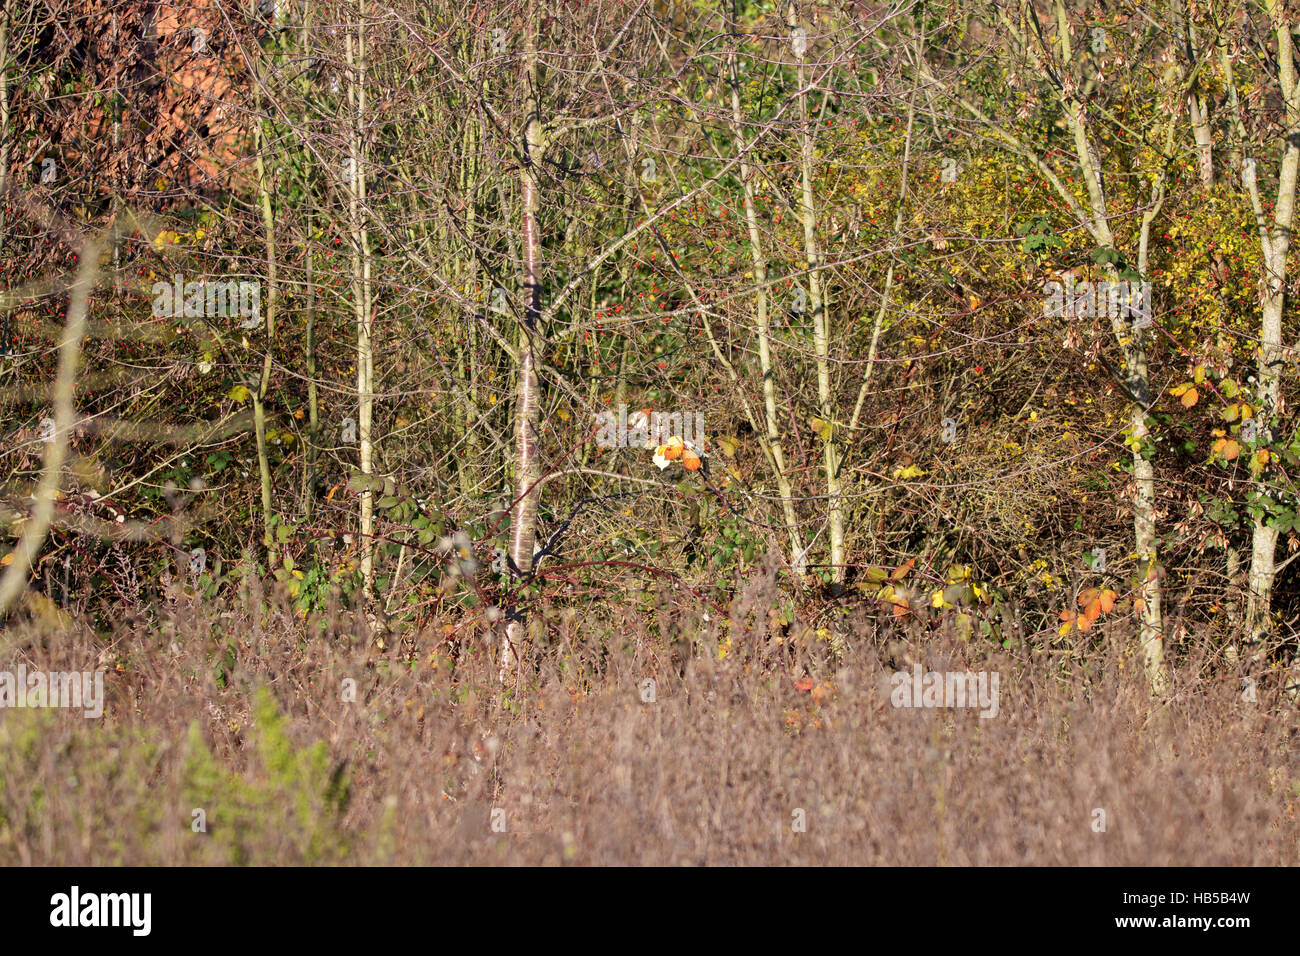 Dried up grass and trees creating autumn mood Stock Photo